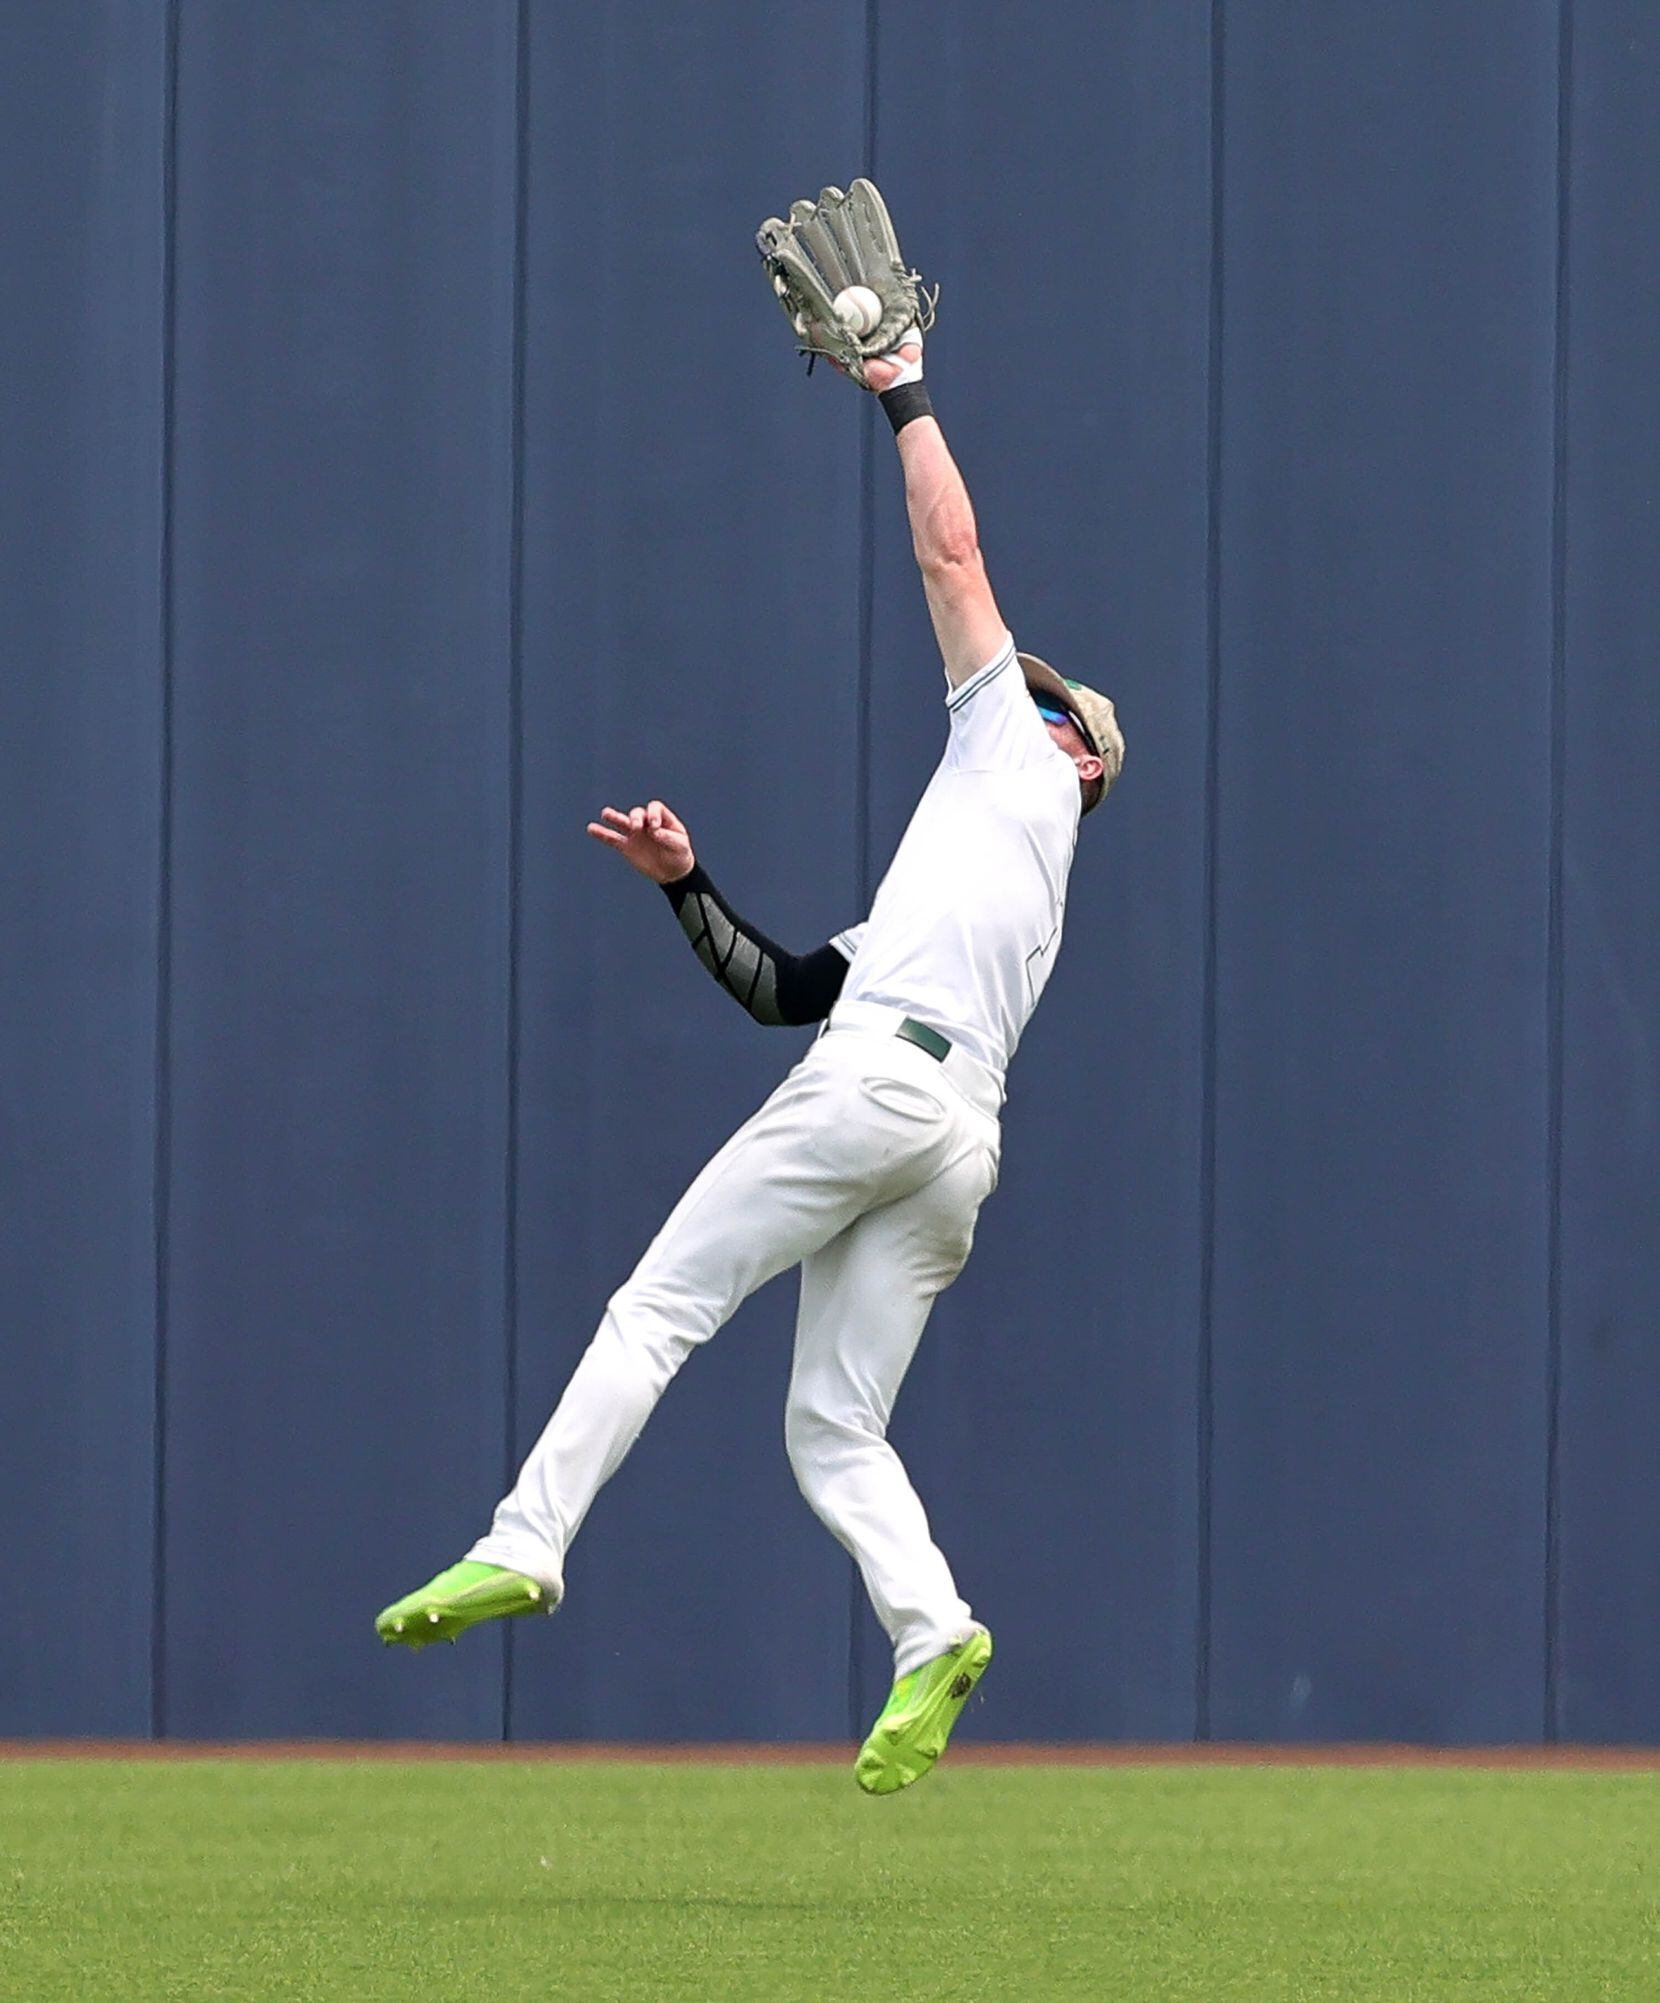 Prosper center fielder Jacob Nelson comes up with a nice catch against Coppell during game 3...